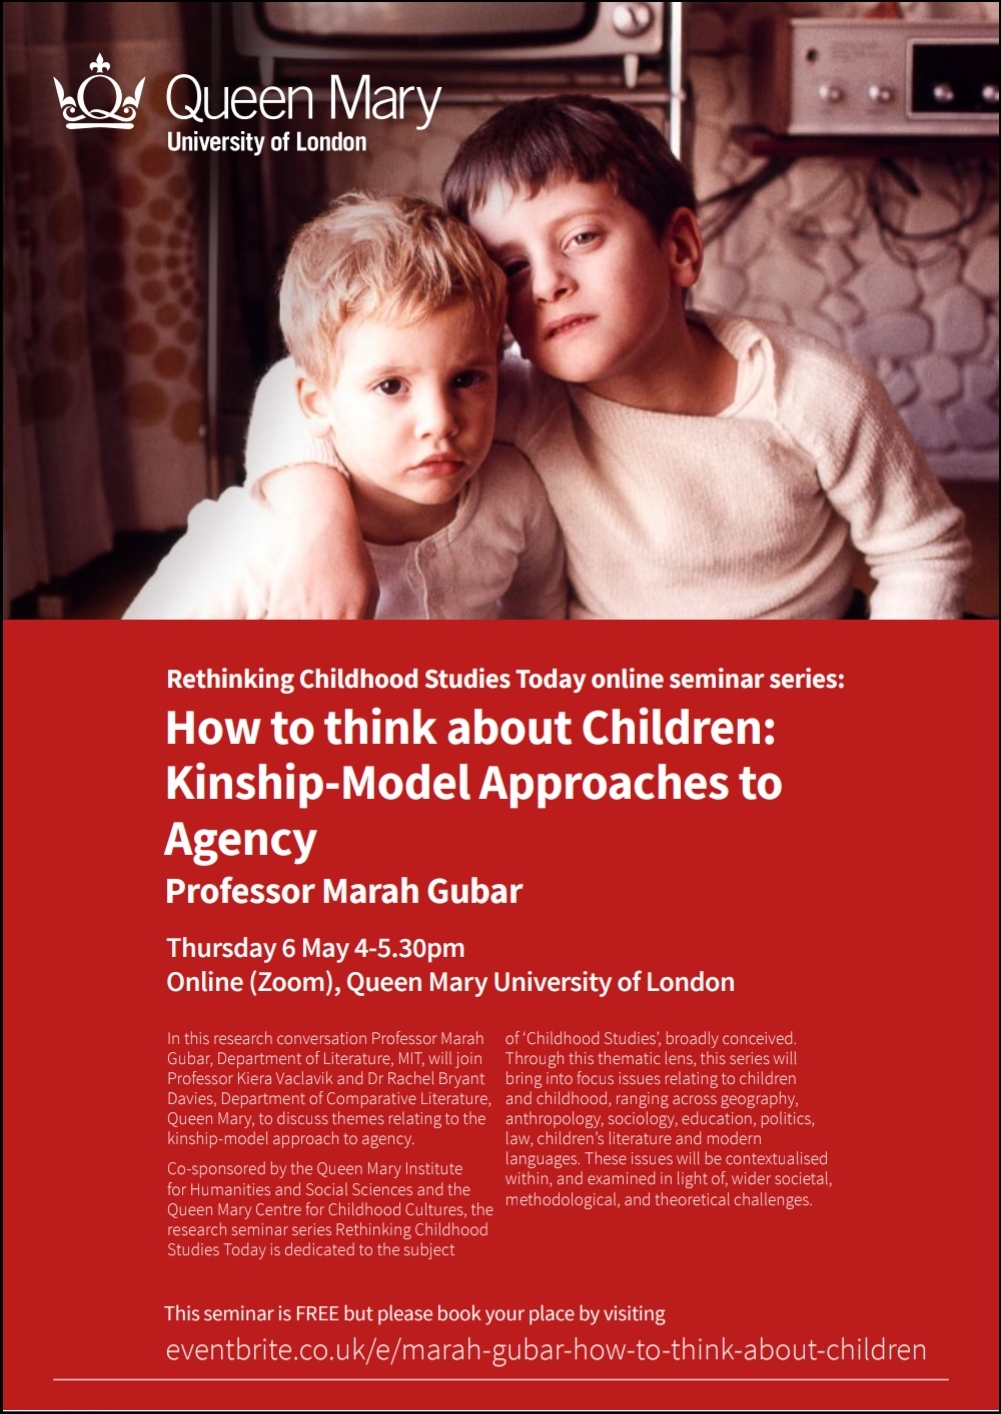 Research conversation: How to think about Children: Kinship-Model Approaches to Agency
Professor Marah Gubar (MIT)
Thursday 6th May 4-5:30pm
Seminar 2 of the Rethinking Childhood Studies Today Seminar Series (Centre for Childhood Cultures/IHSS)
